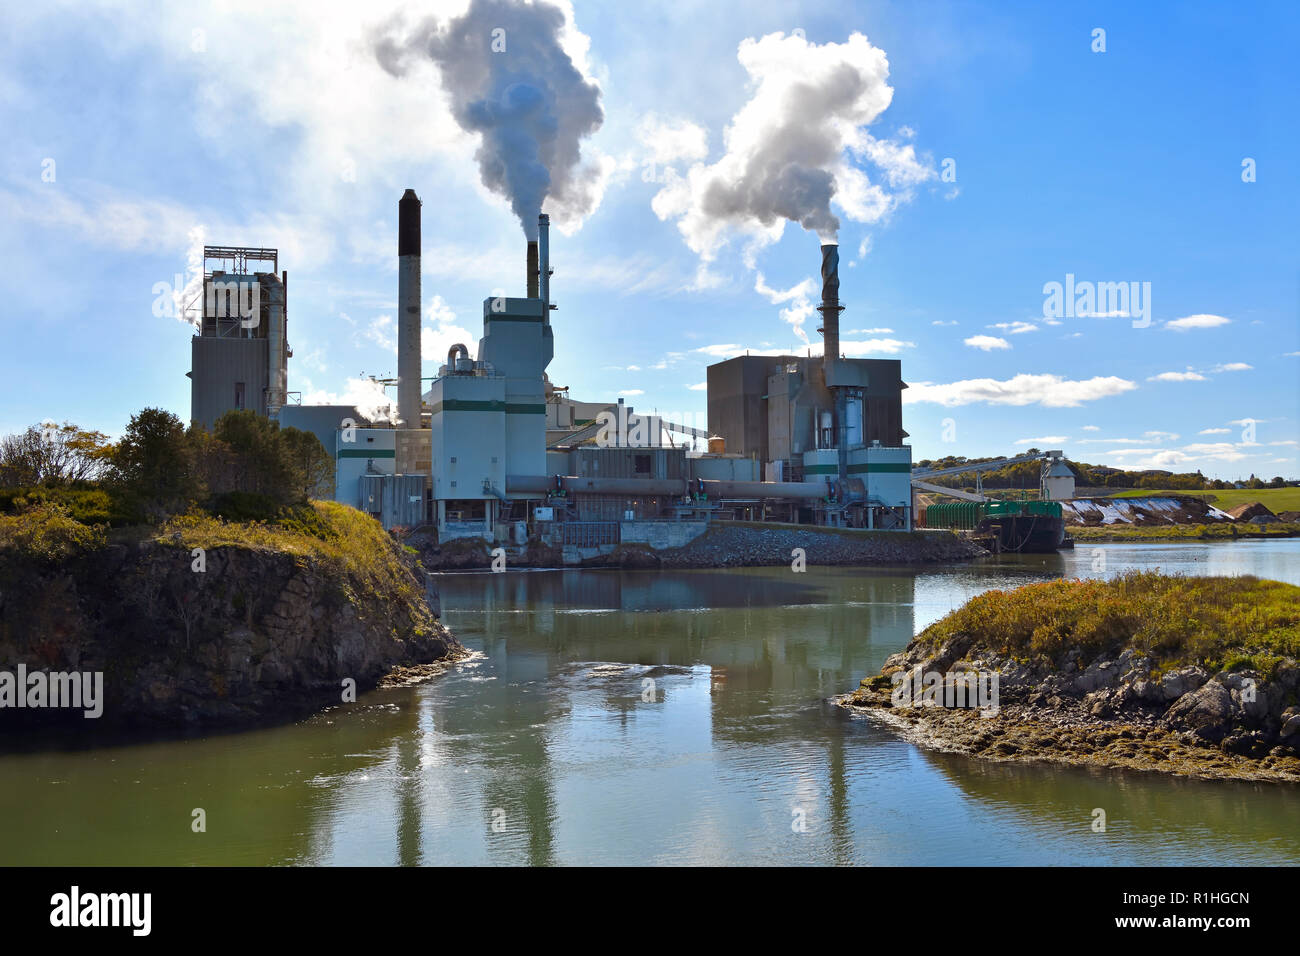 A horizontal landscape image of the Irving pulp mill situated at the famous Reversing Falls on the Saint John River in the city of Saint John New Brun Stock Photo